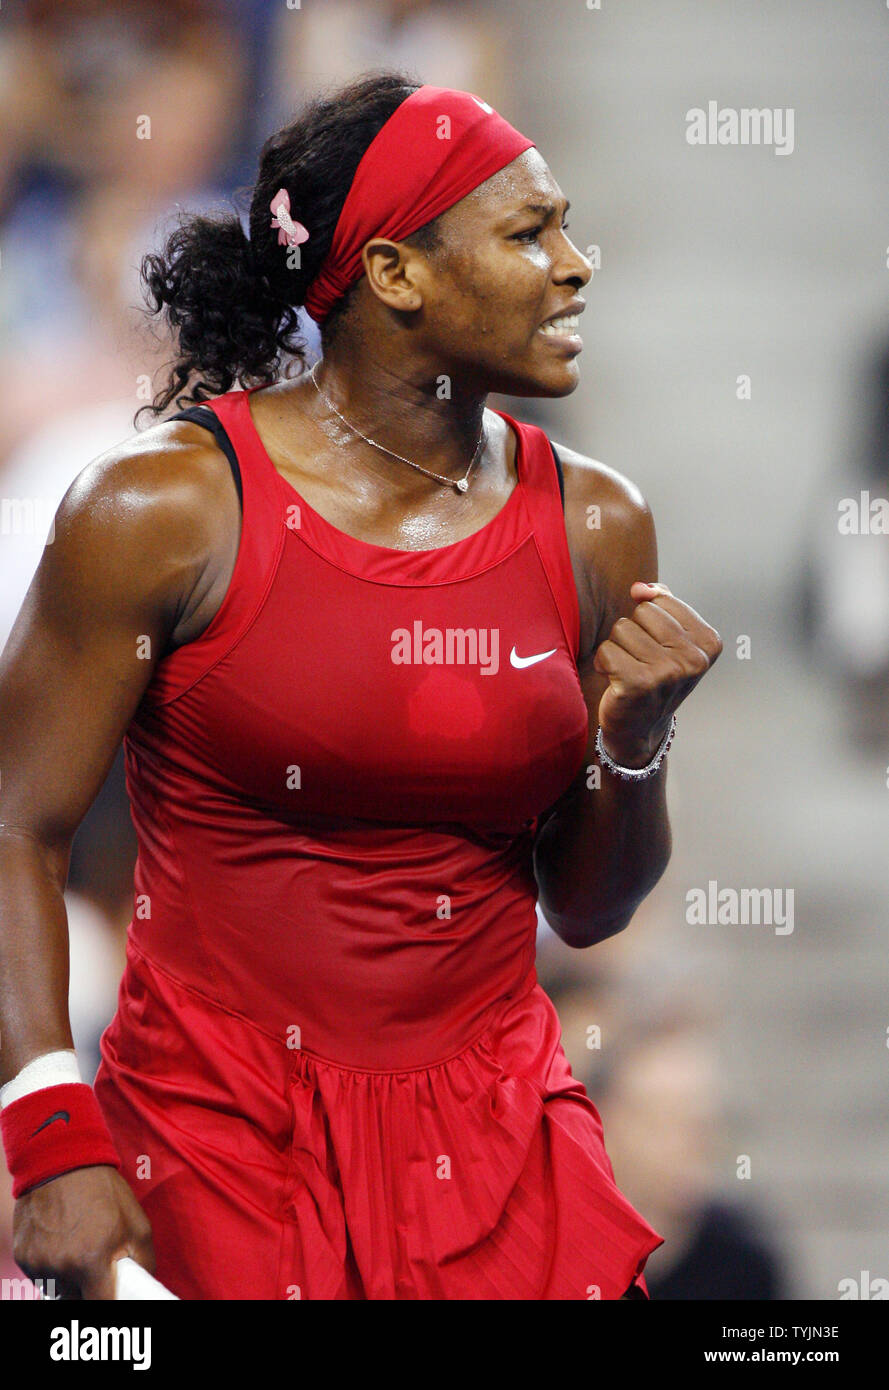 Serena Williams pumps her fist in her match against Severine Bremond on day eight at the U.S. Open Tennis Championships at the U.S. National Tennis Center in Flushing Meadows, New York on September 1, 2008. Williams defeated Bremond 6-2 6-2.         (UPI Photo/John Angelillo) Stock Photo